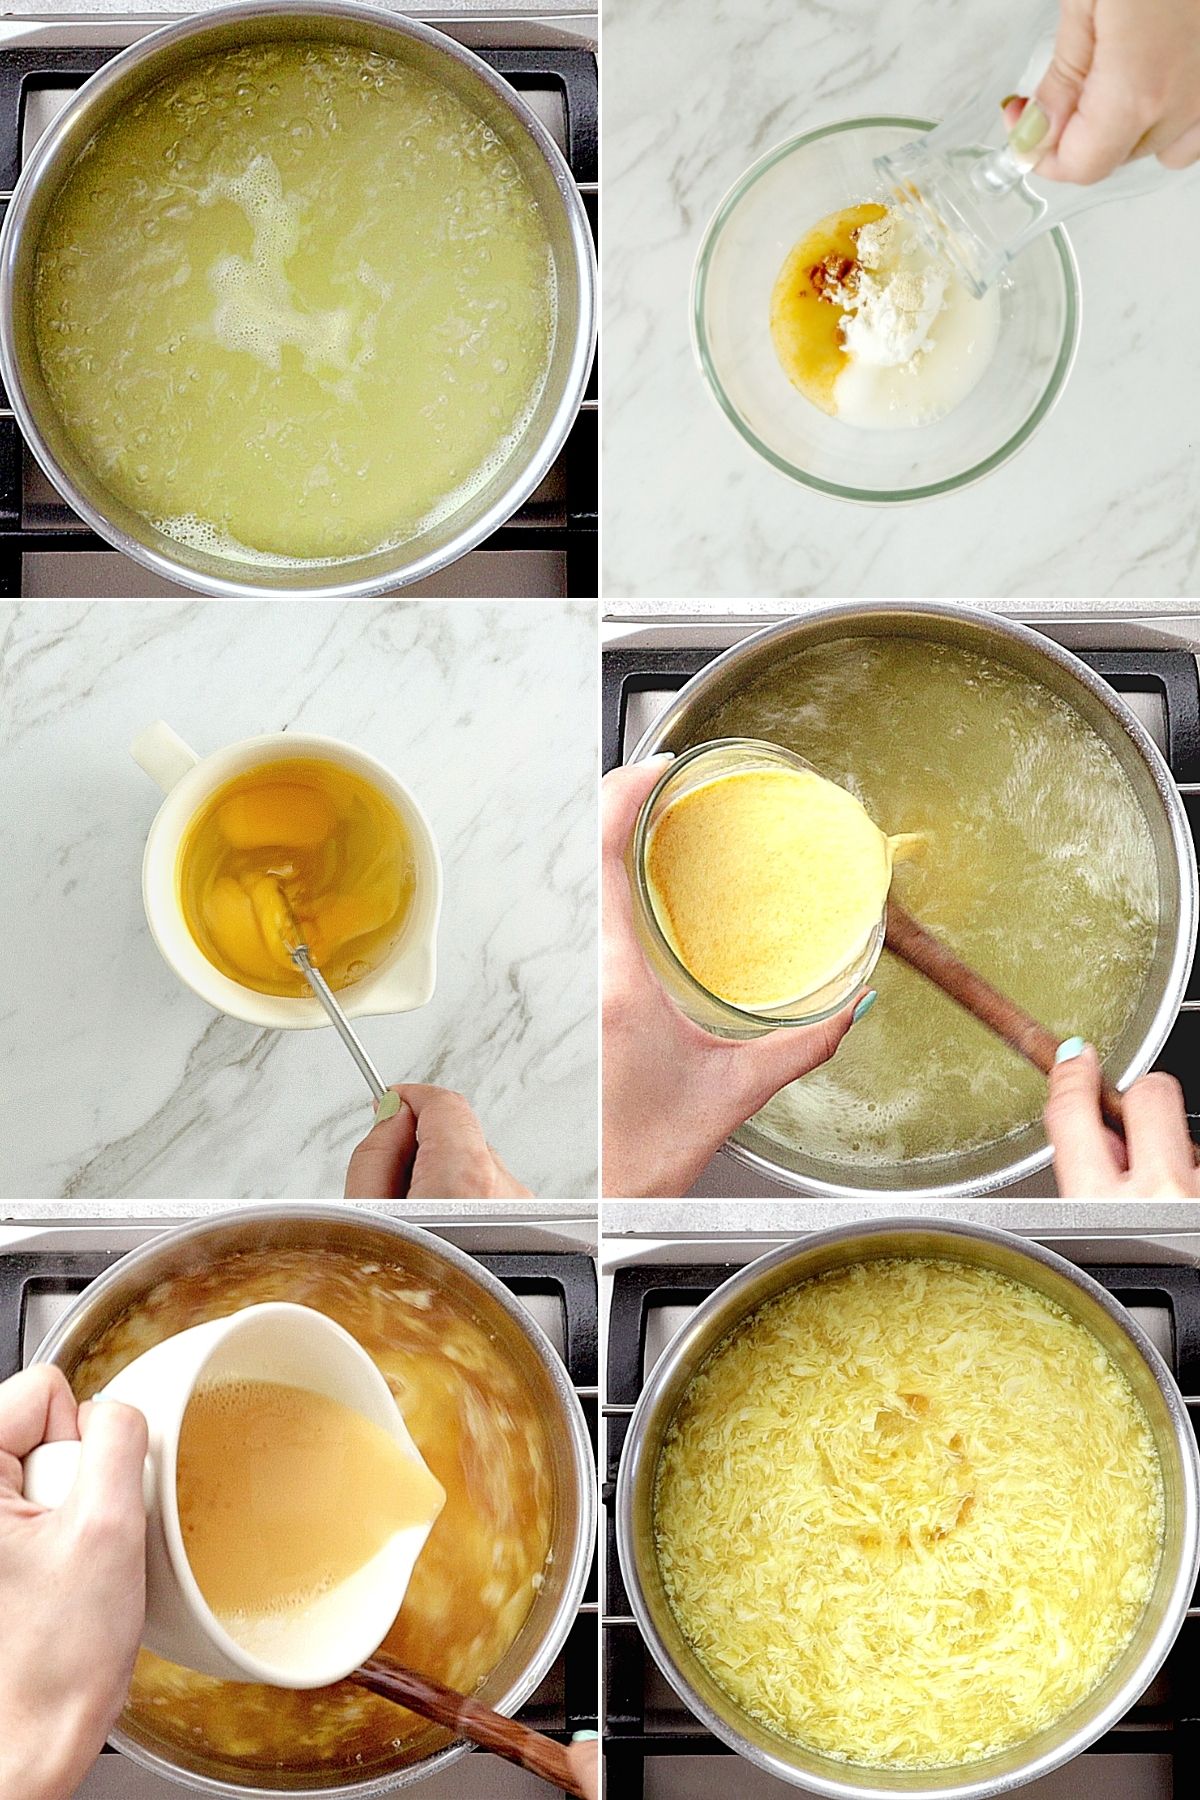 Step-by-step process on making egg drop soup